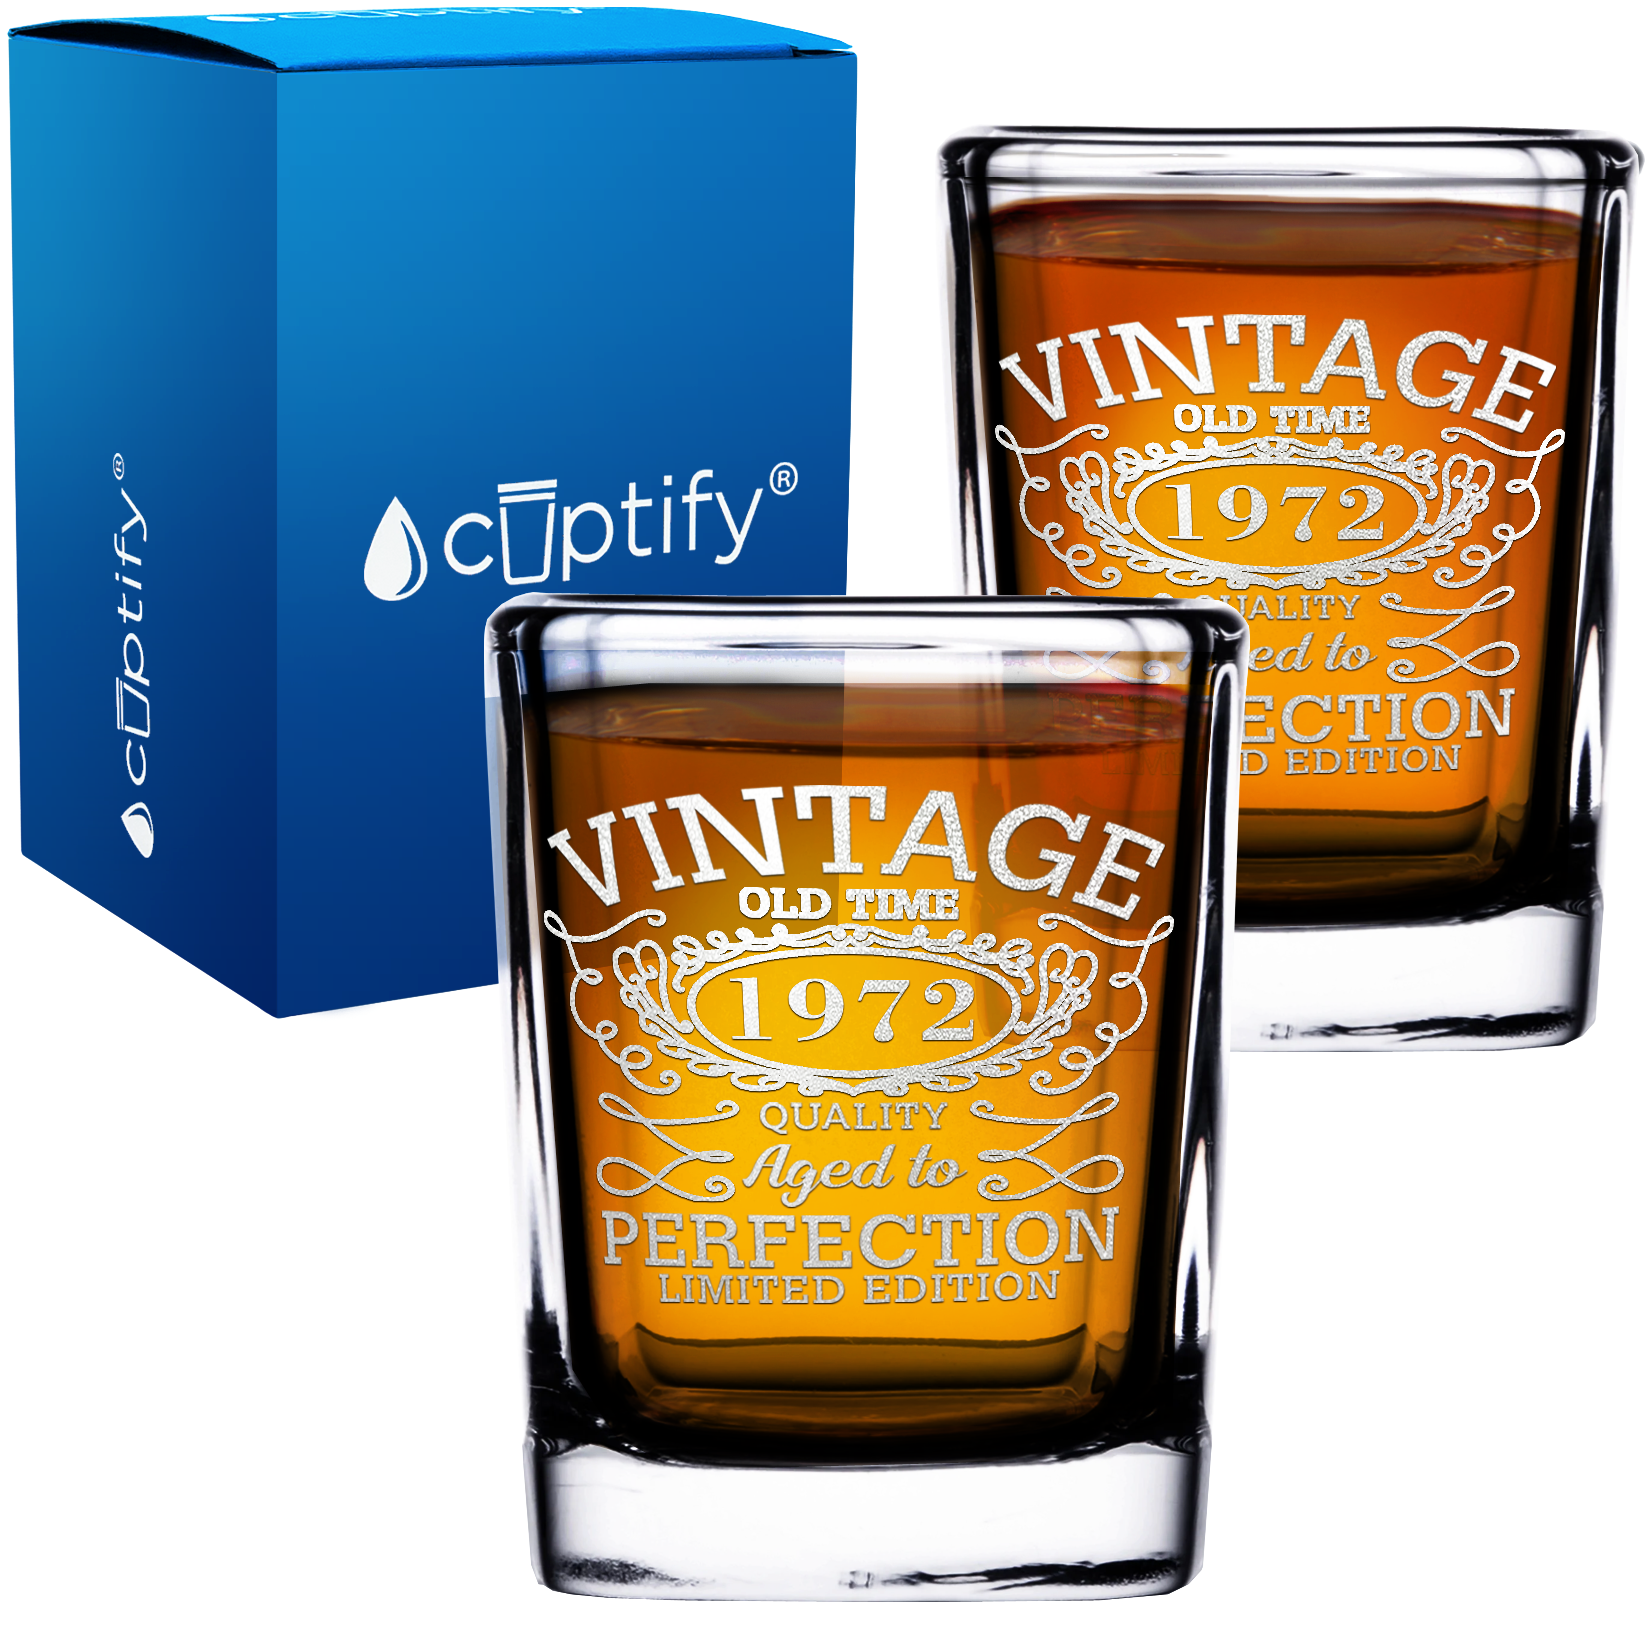 50th Birthday Vintage 50 Years Old Time 1972 Quality 2oz Square Shot Glasses - Set of 2